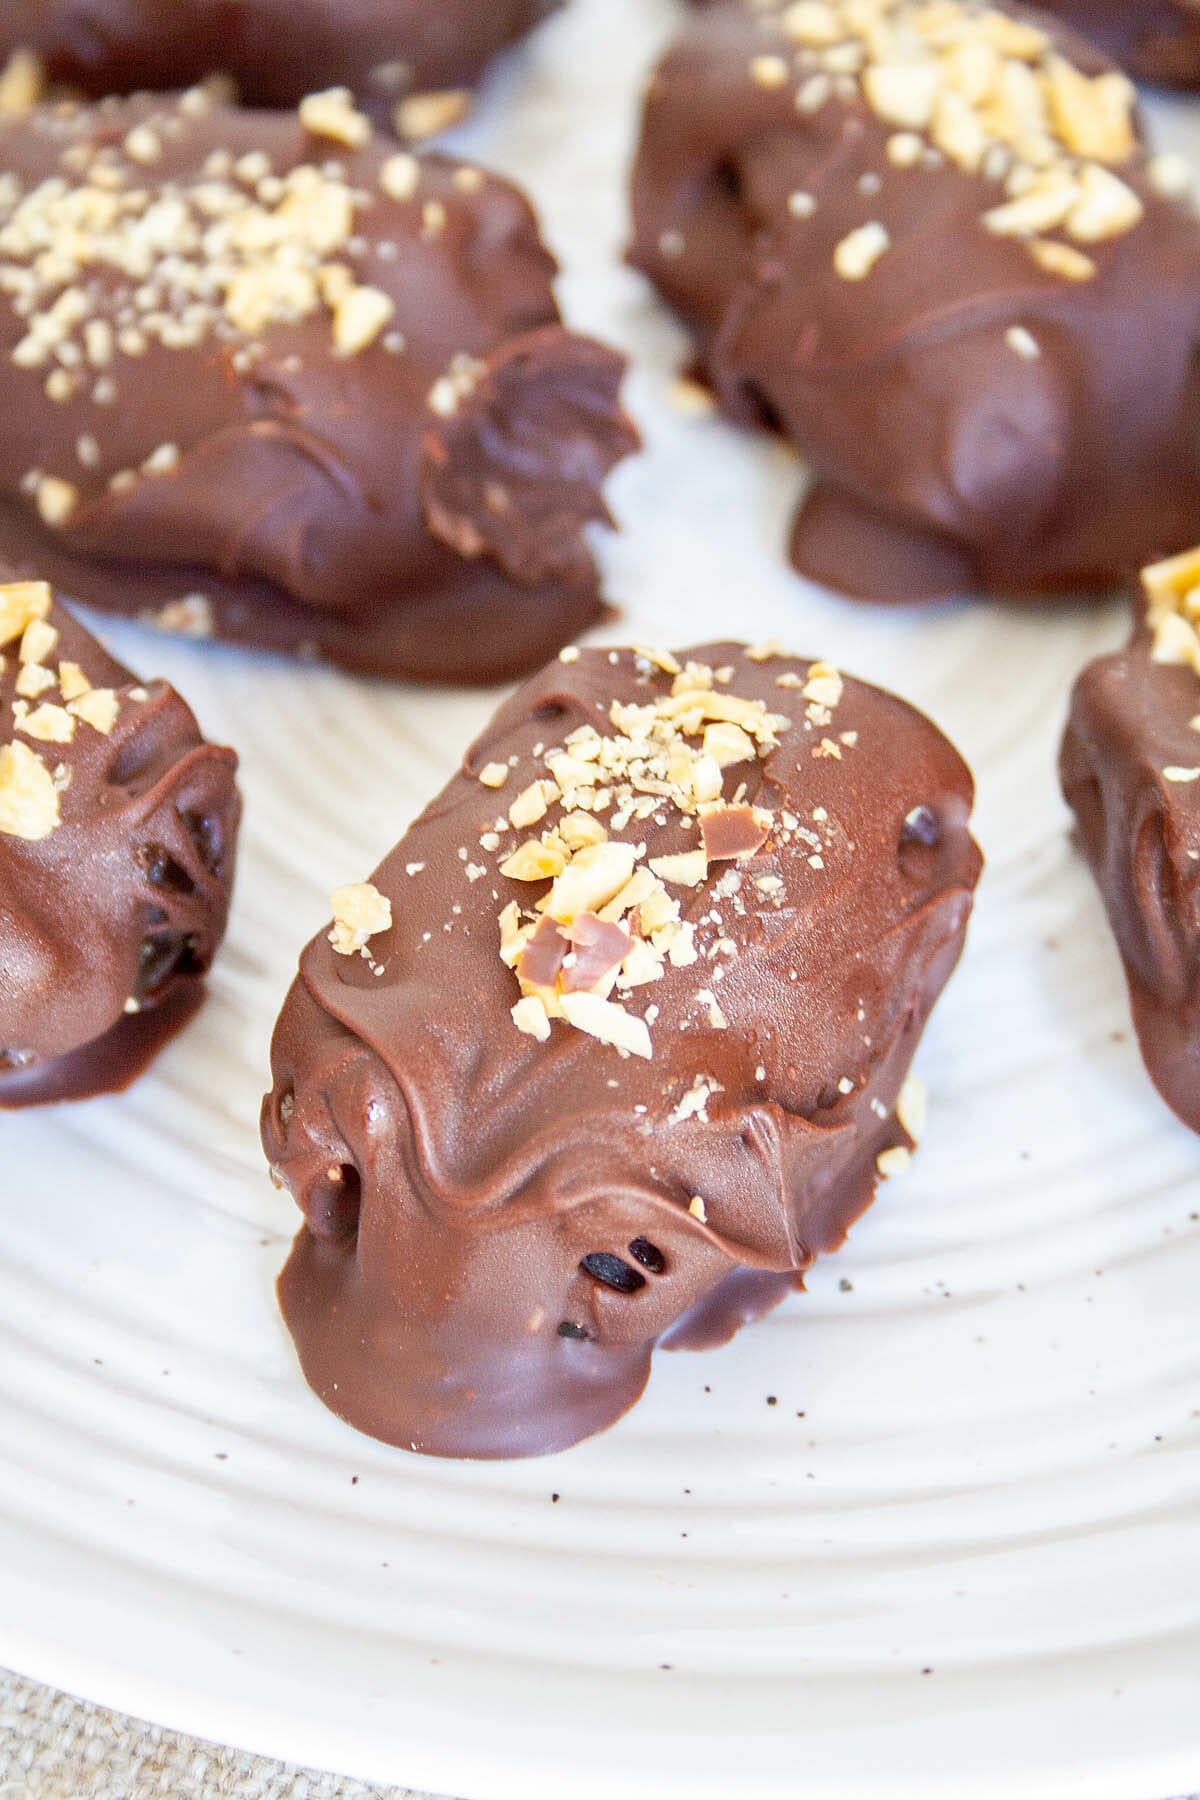 Chocolate Covered Peanut Butter Stuffed Dates on a plate close up.